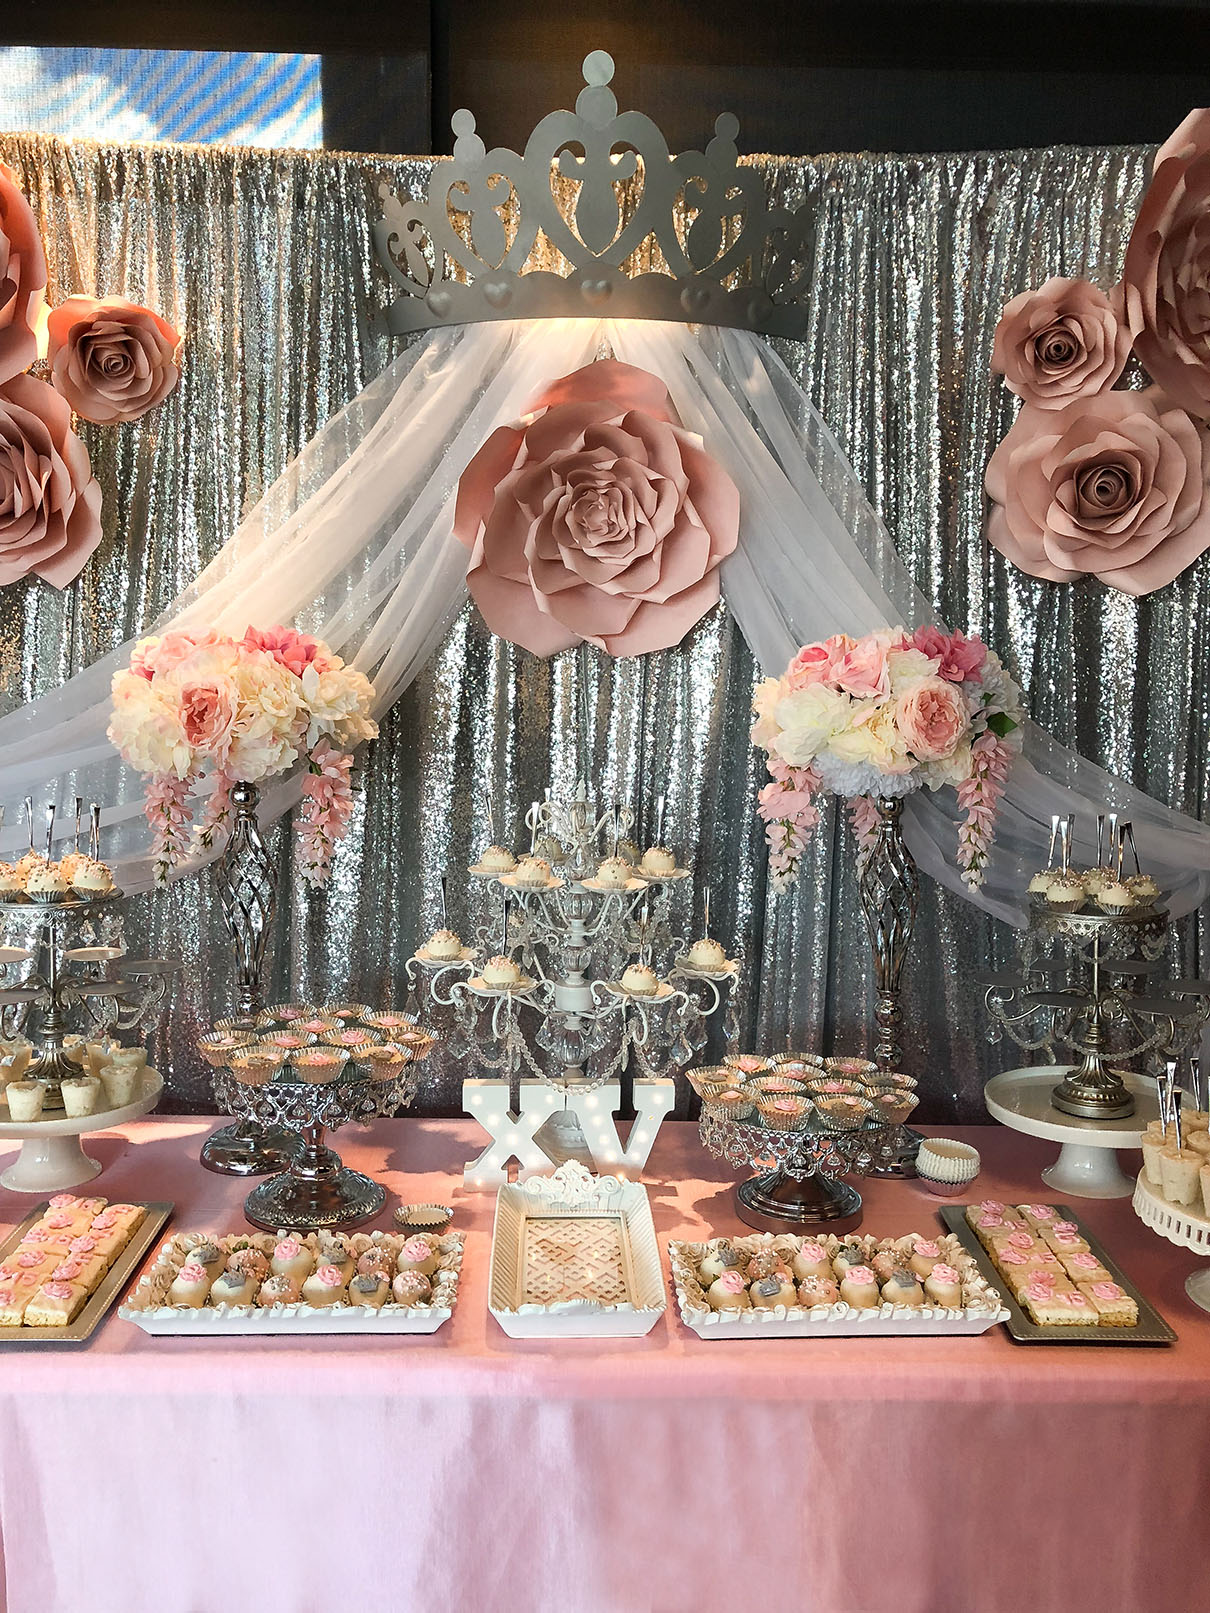 A Peruvian, Perfectly Pink Quinceañera | Infinity Hospitality's Blog